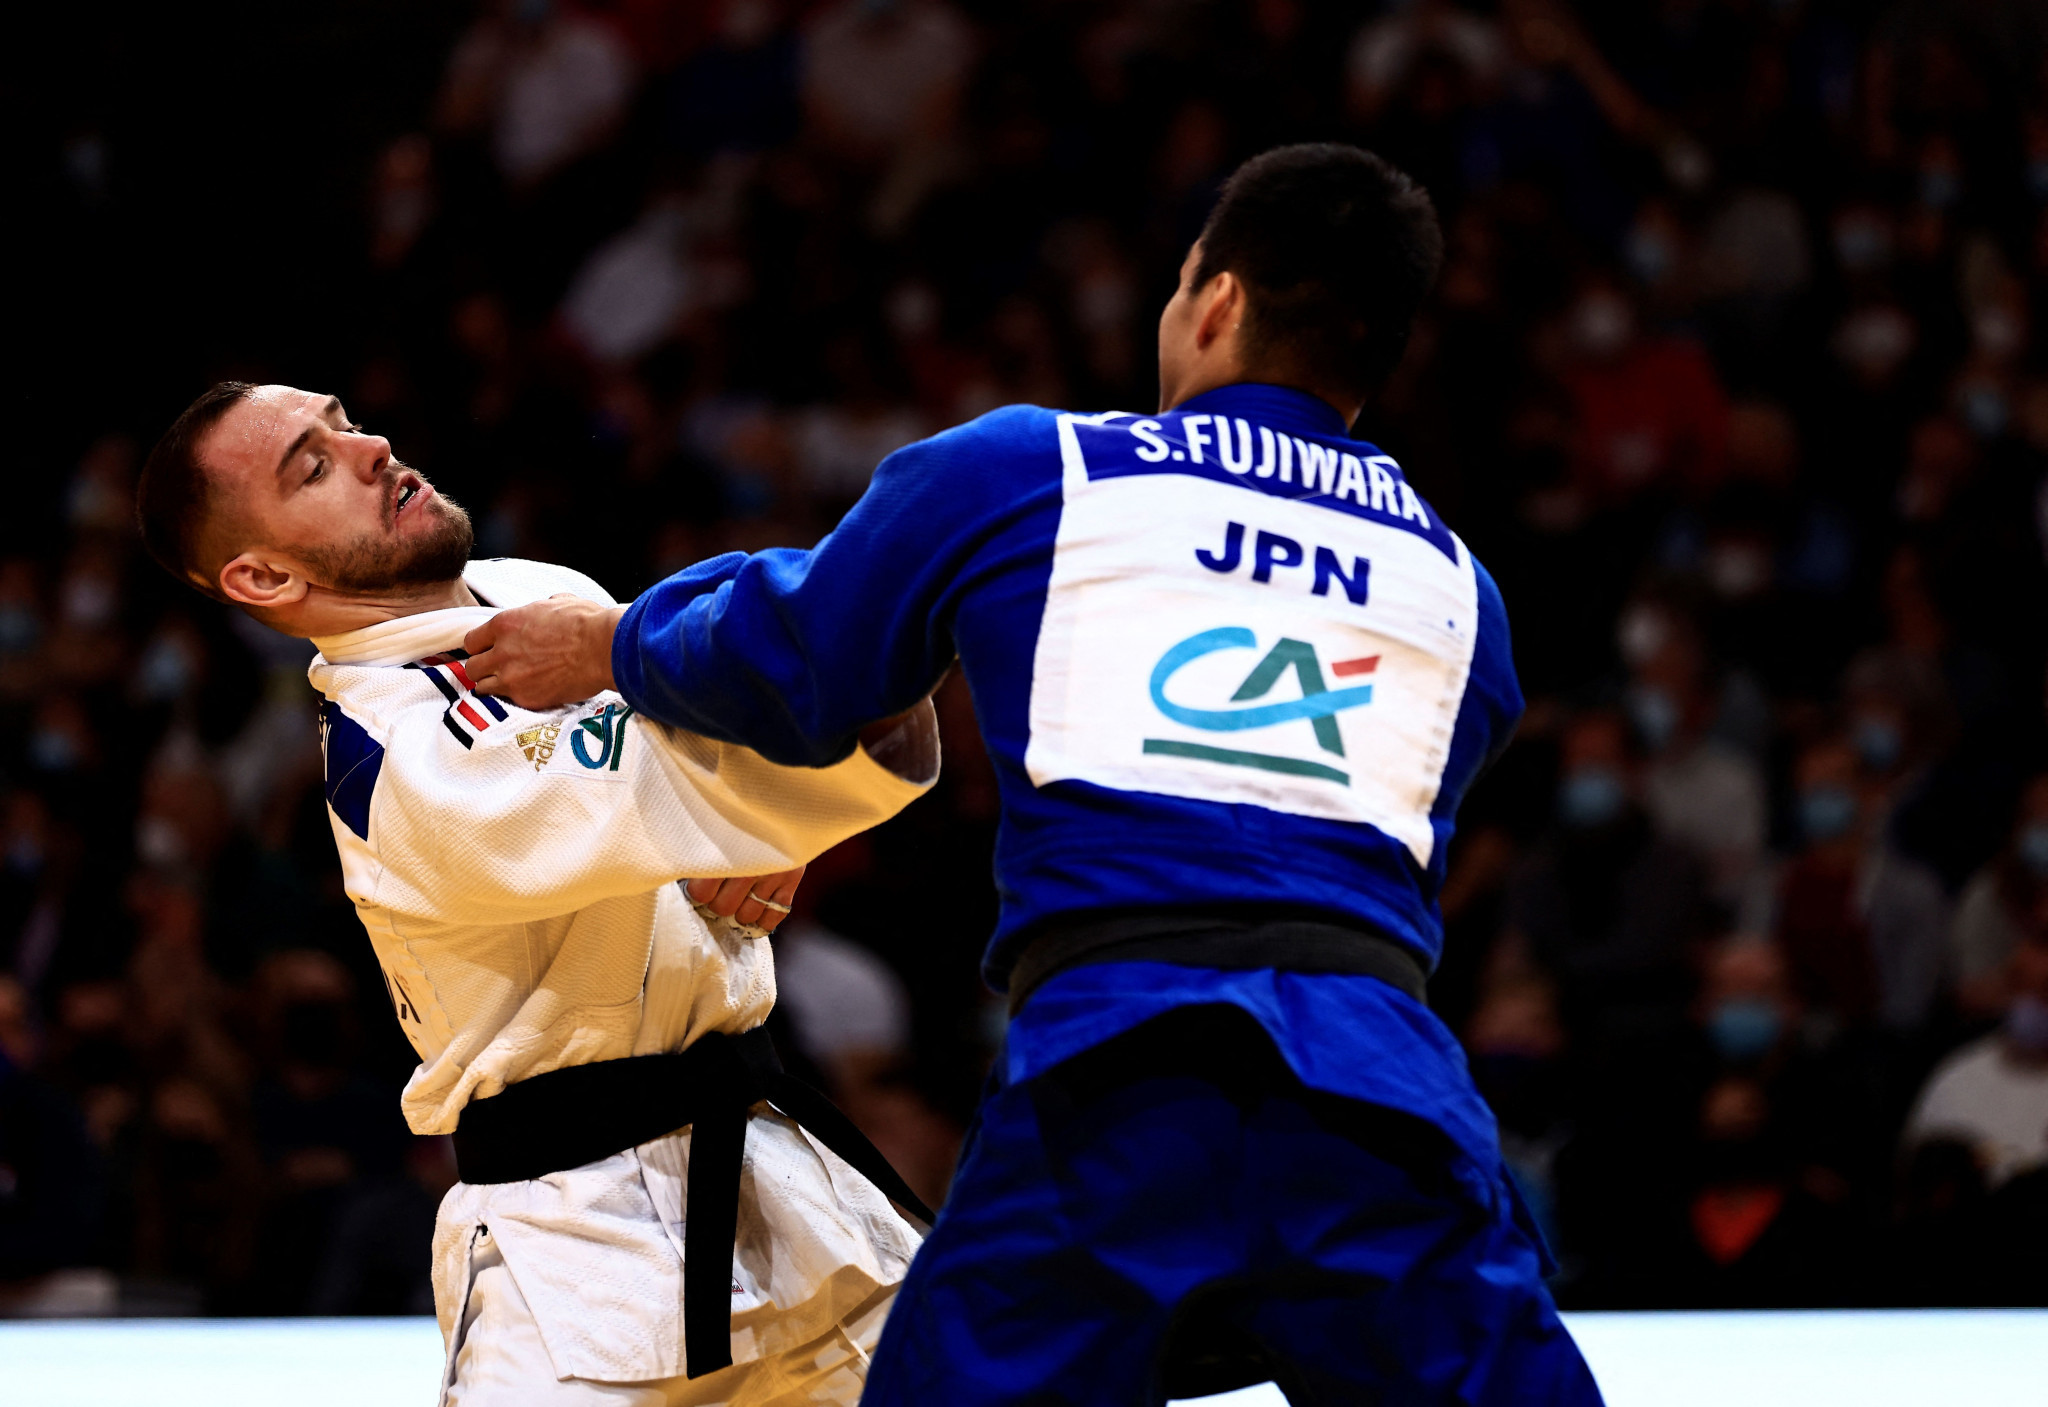 Sotaro Fujiwara won one of three Japanese gold medals on the last day of the Paris Grand Slam ©Getty Images